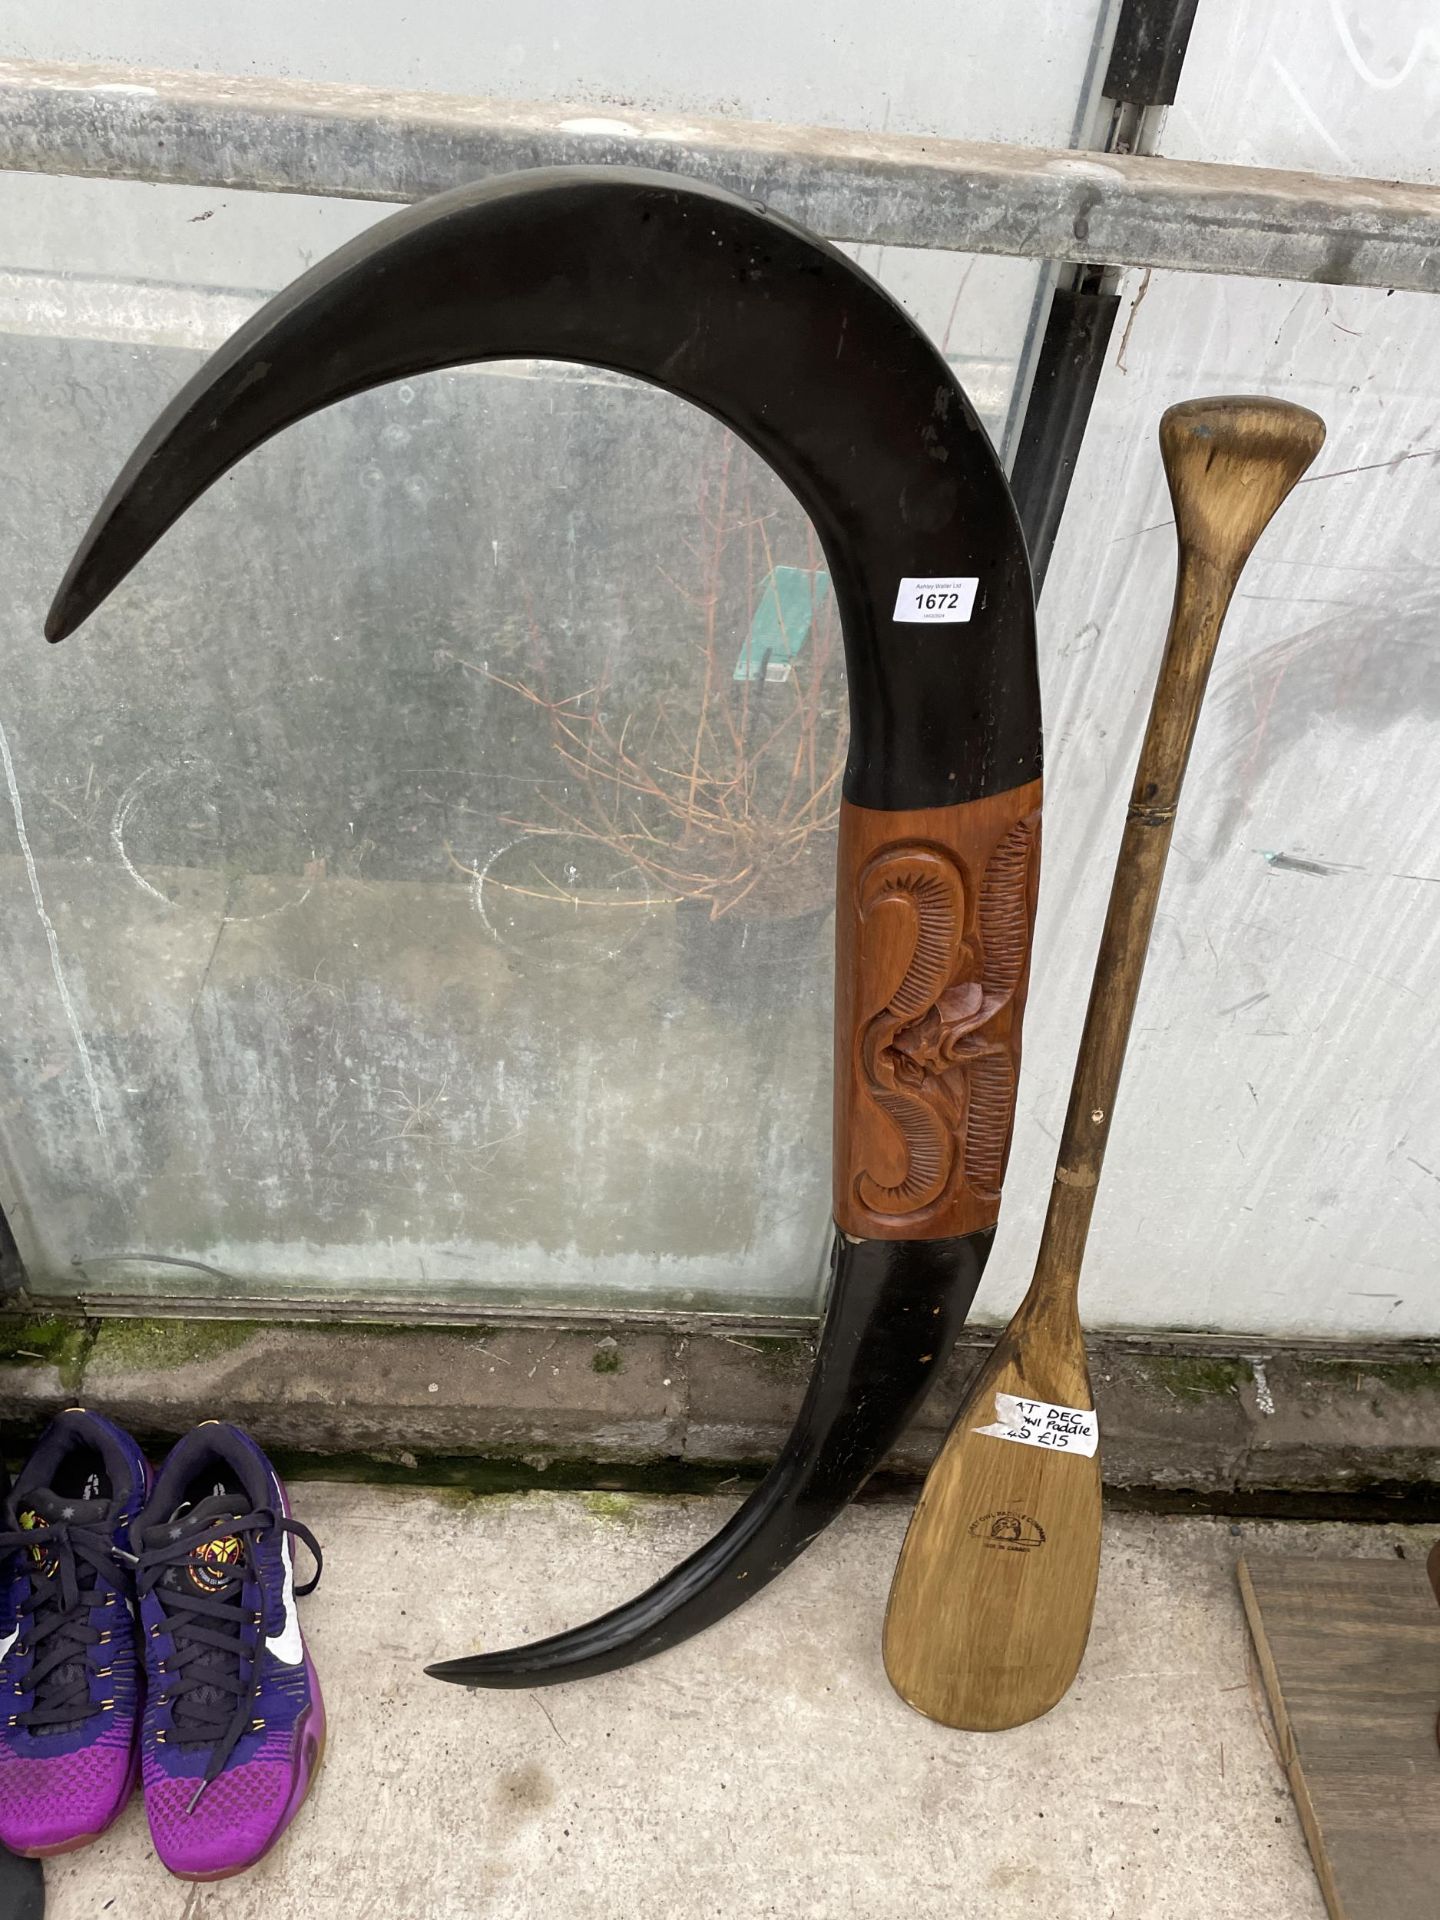 AWOODEN PADDLE AND A WOODEN PLAQUE IN THE FORM OF HORNS